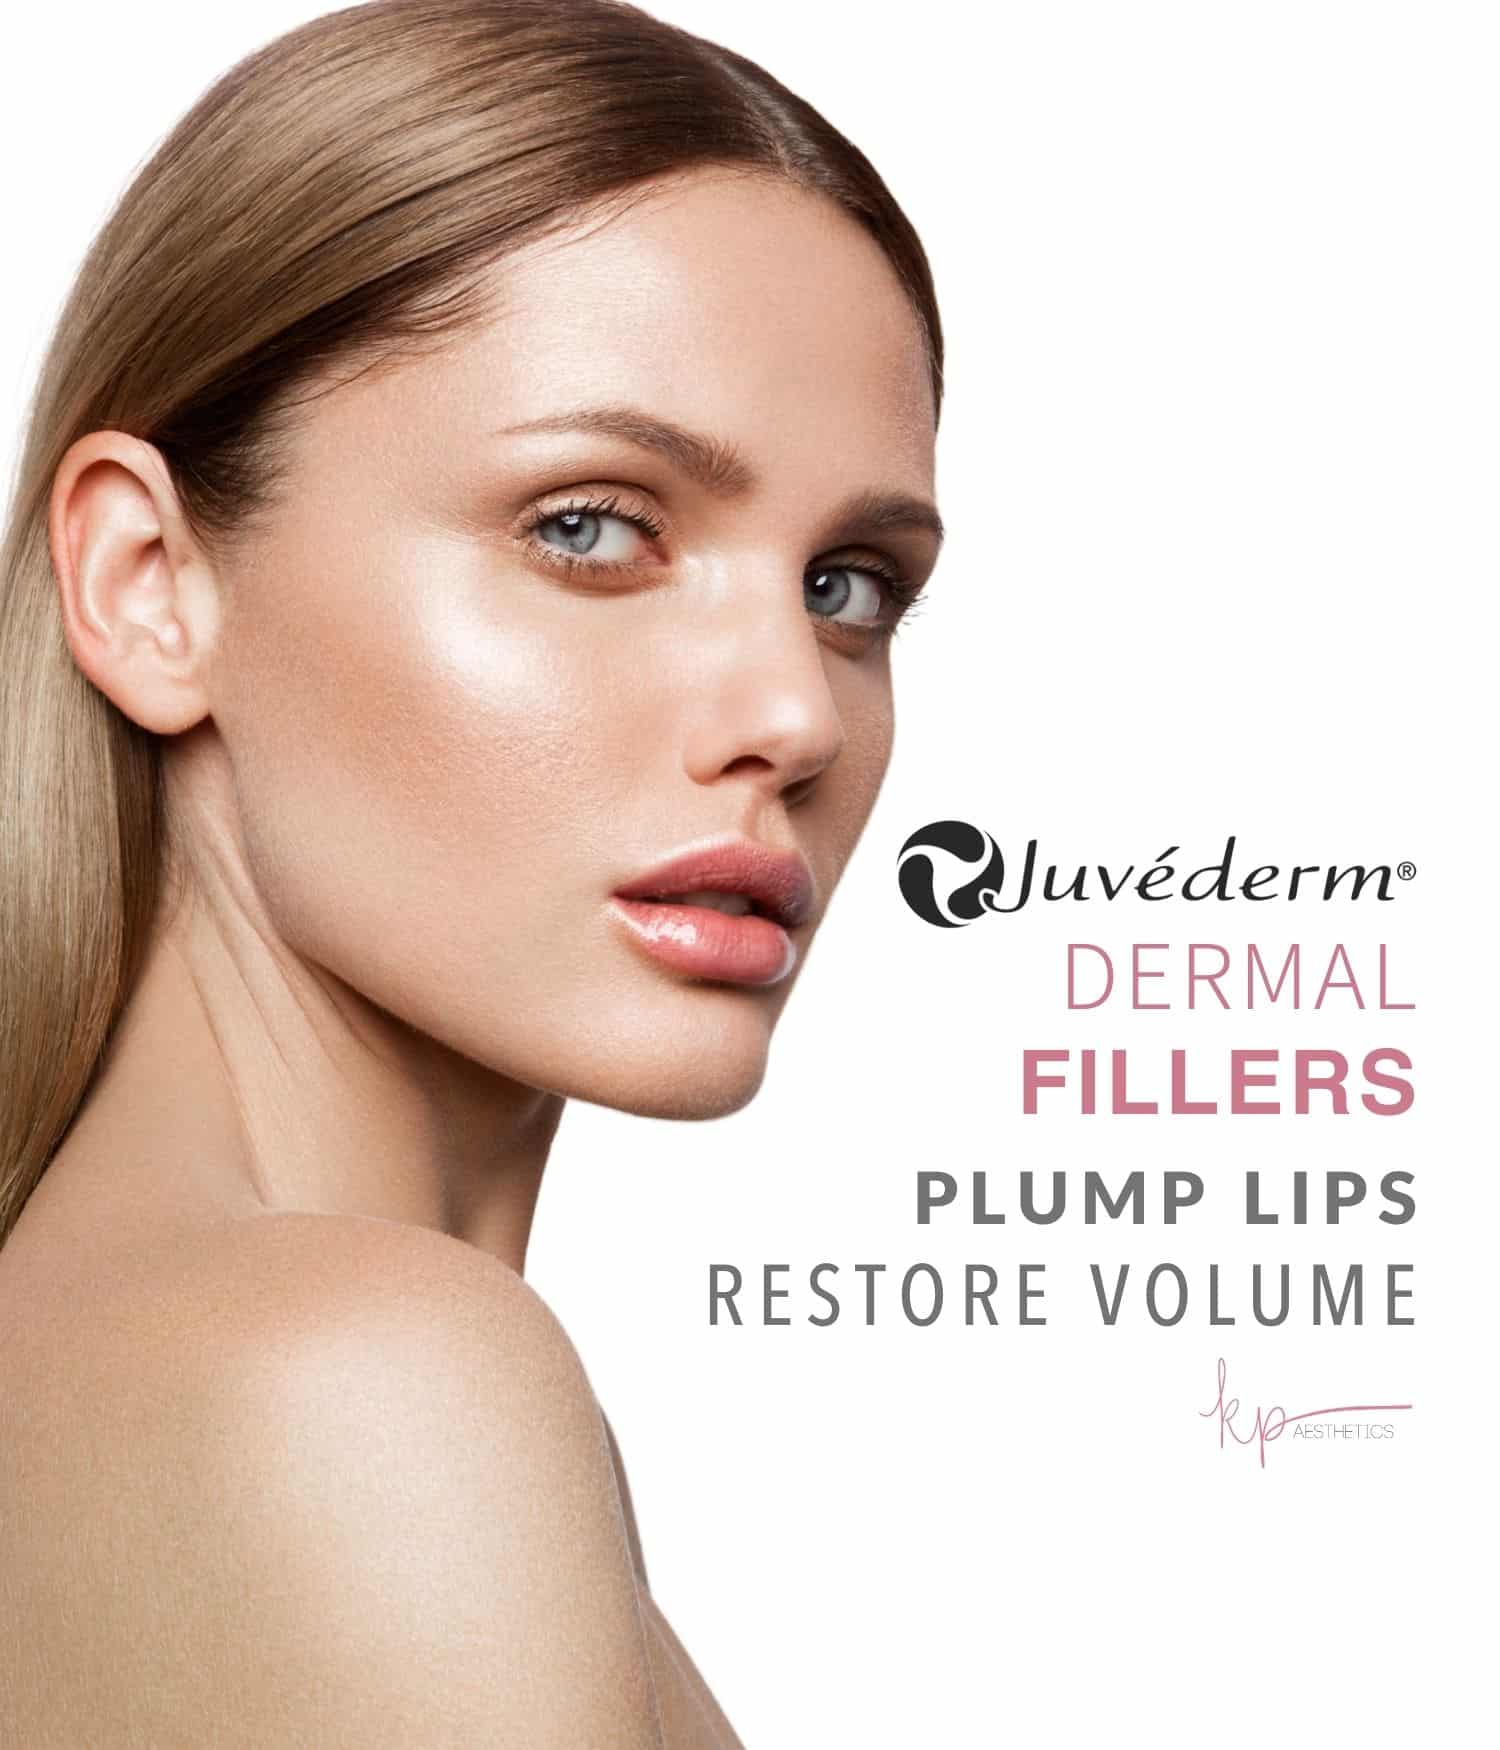 Woman touching her face showing her accentuated and youthful appearance with Juvederm Dermal Fillers results.